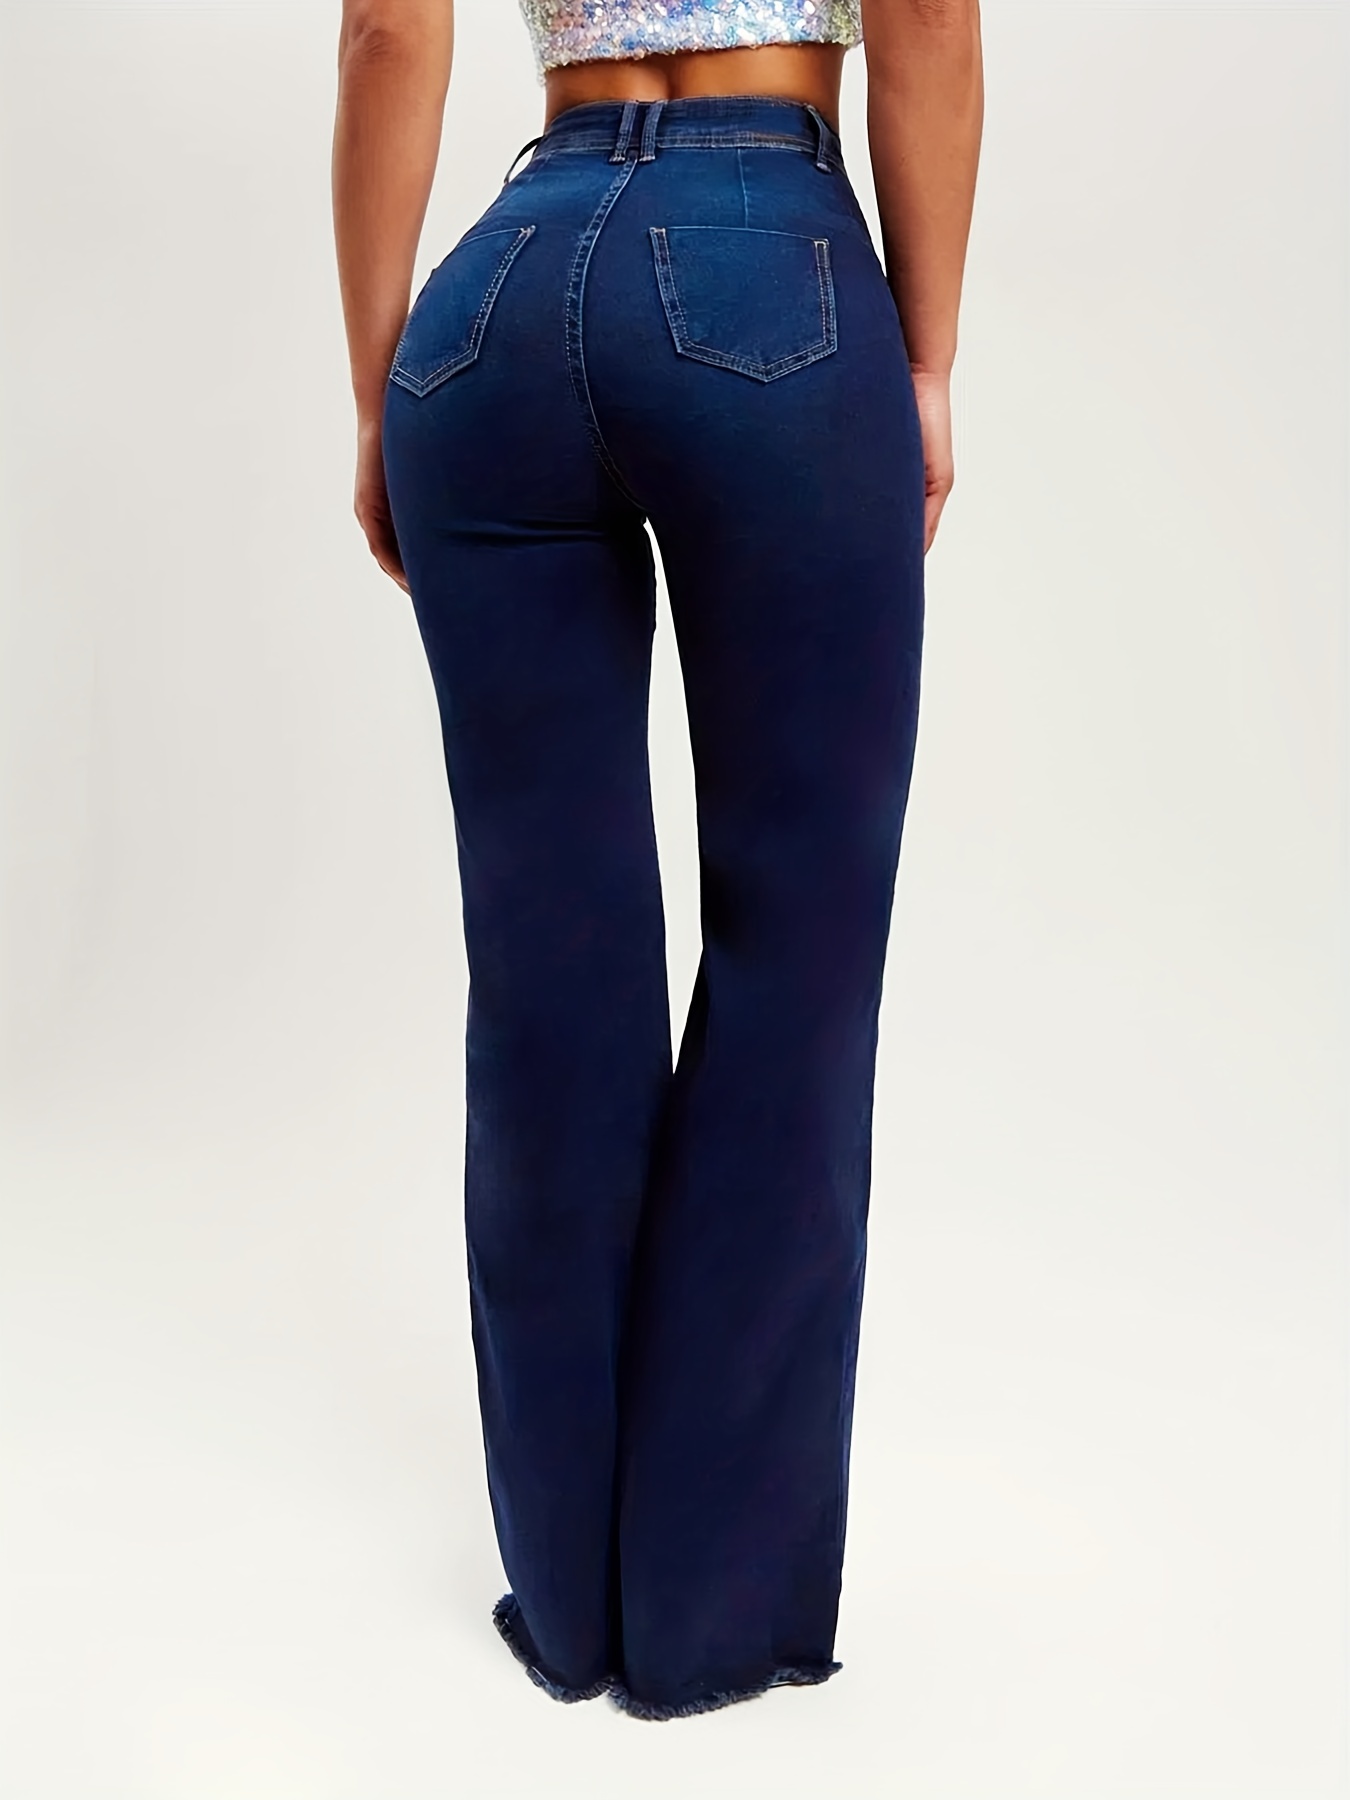 Women's Bootcut and Flare Jeans, Colored